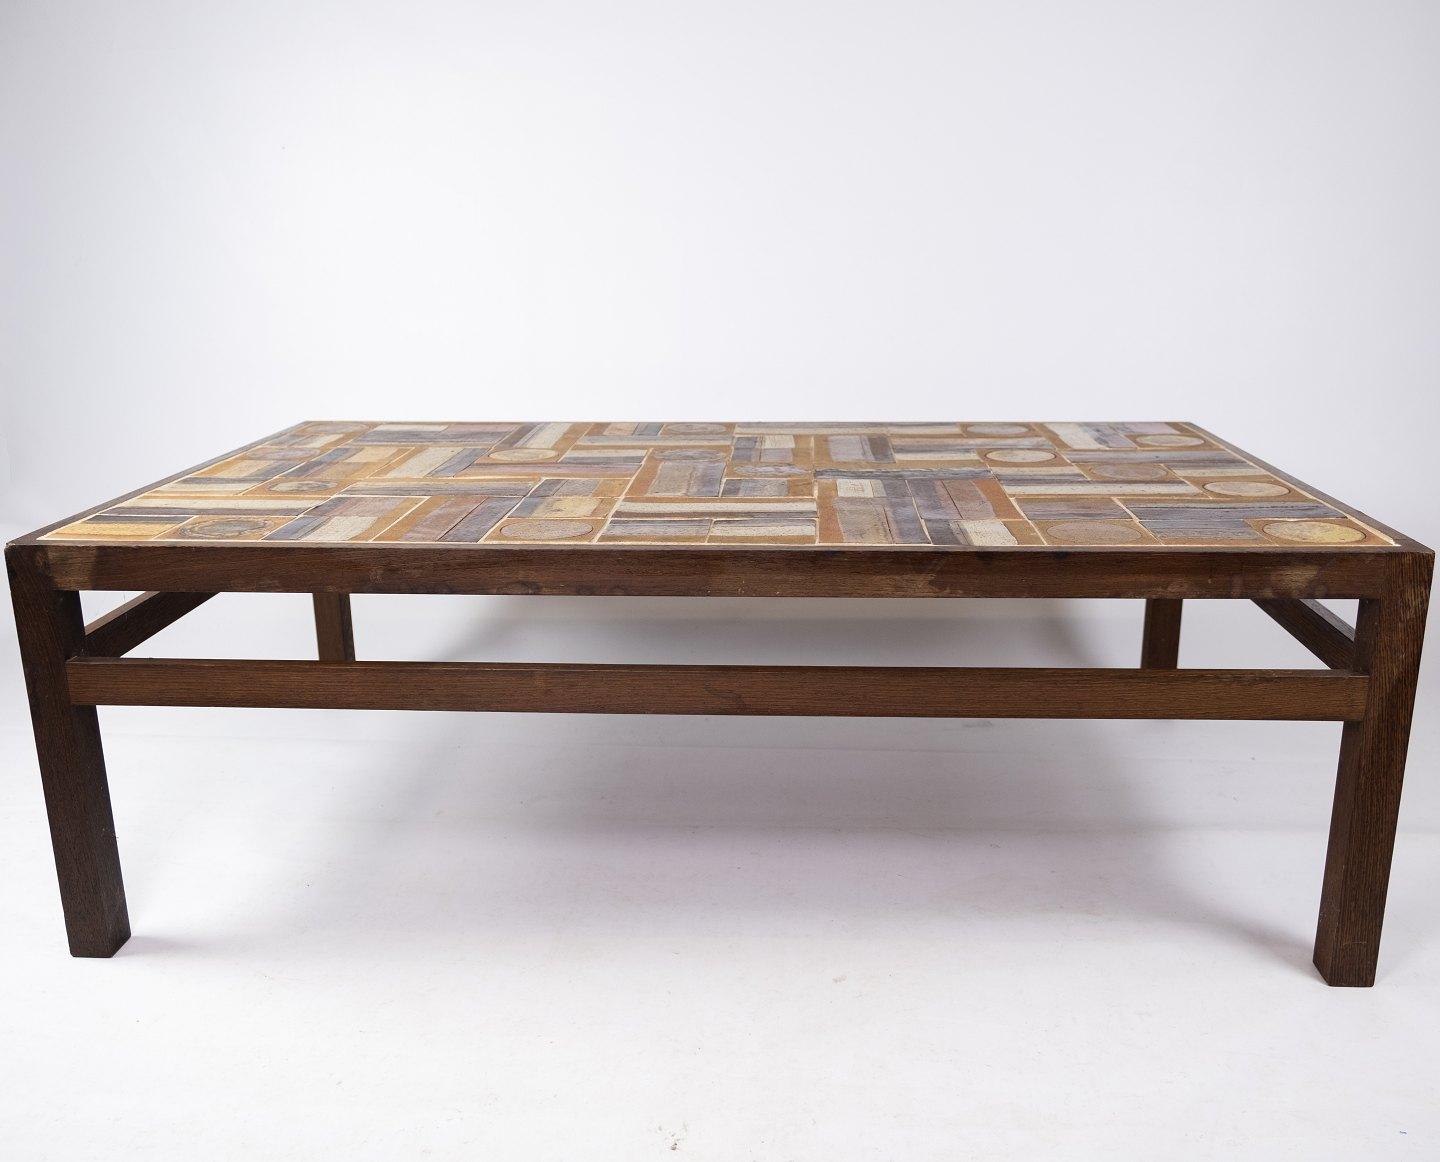 Coffee table in rosewood and dark tiles, designed by Tue Poulsen from the 1970s. The table is in great vintage condition.
Measures: H 45 cm, W 134 cm and D 80 cm.